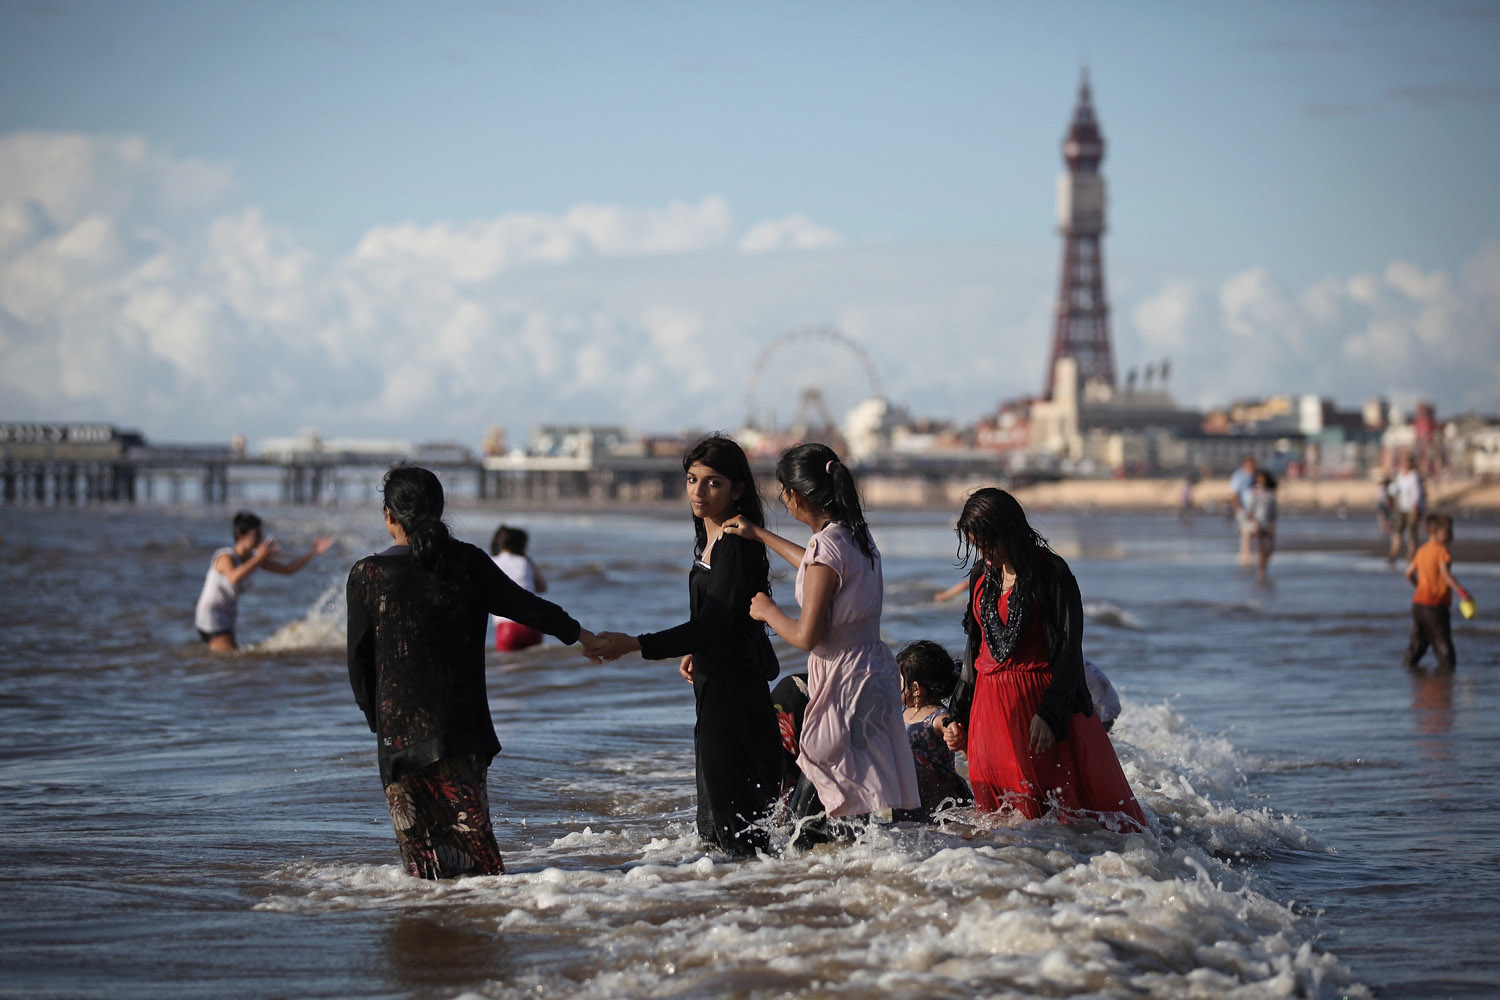 Aug. 21, 2012. A family plays in the sea in Blackpool, England.